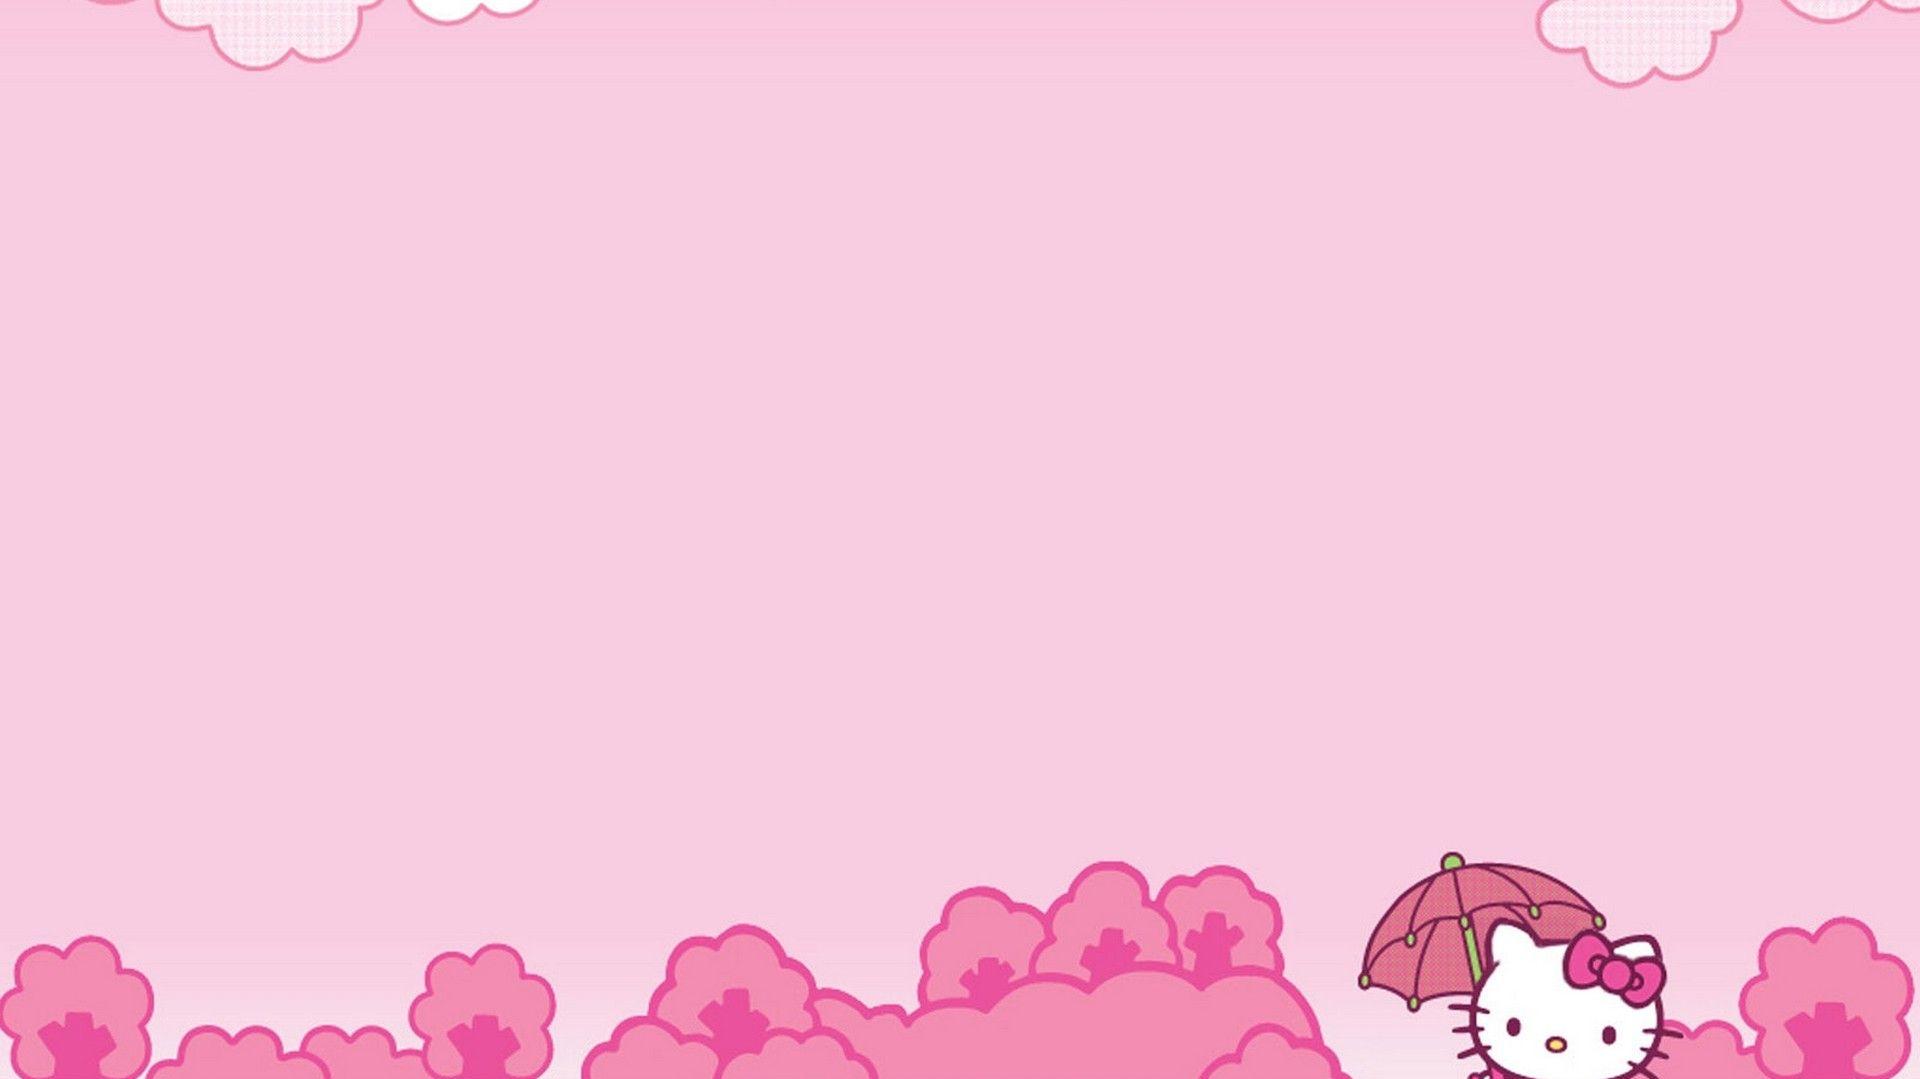 Free download 75] Hello Kitty Wallpaper Pink [1366x768] for your ...